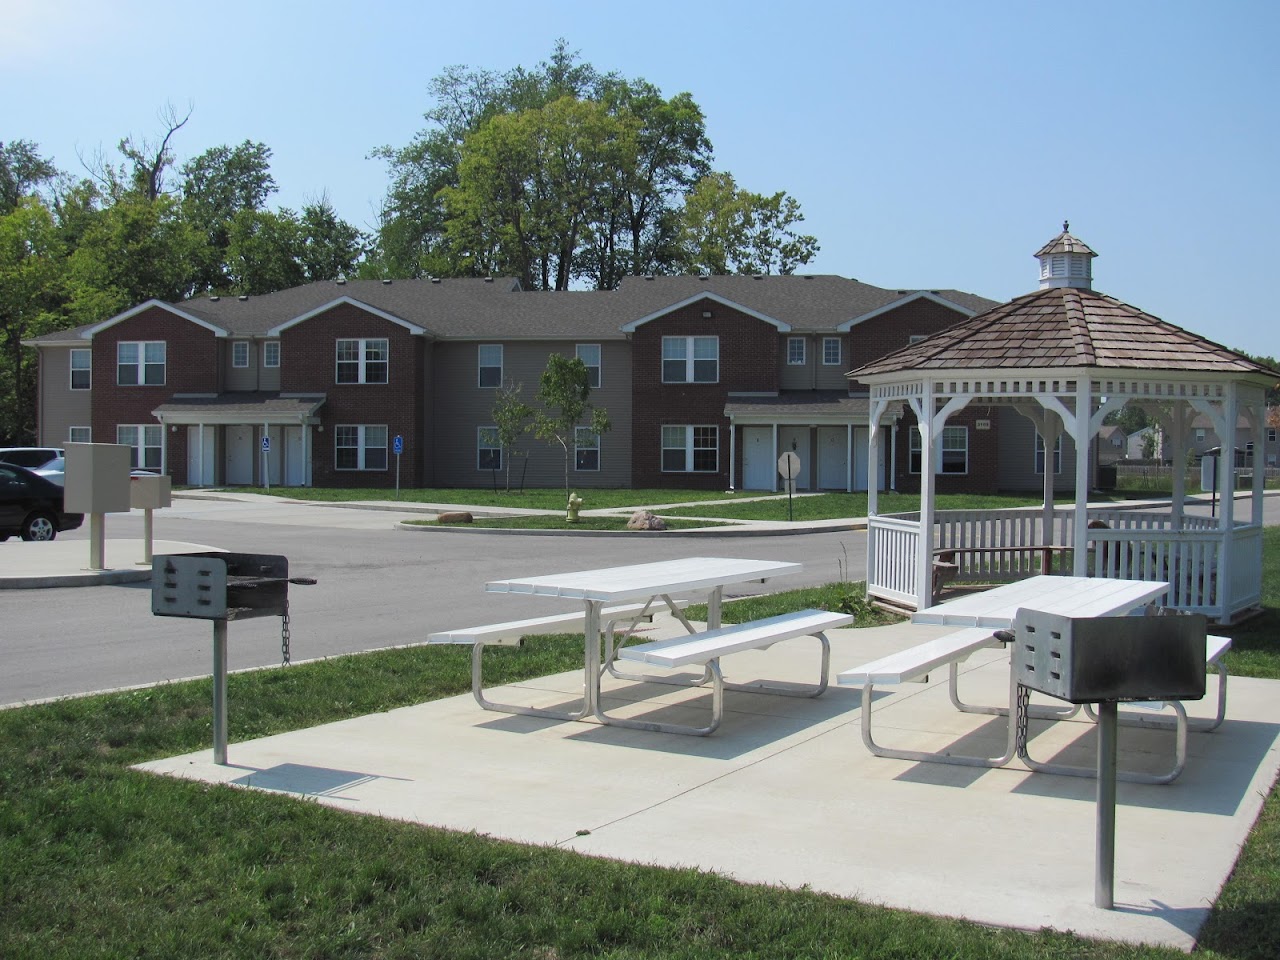 Photo of CHAPELGATE PARK SENIOR APTS. Affordable housing located at 3050 CHAPEL GATE WAY WEST LAFAYETTE, IN 47906